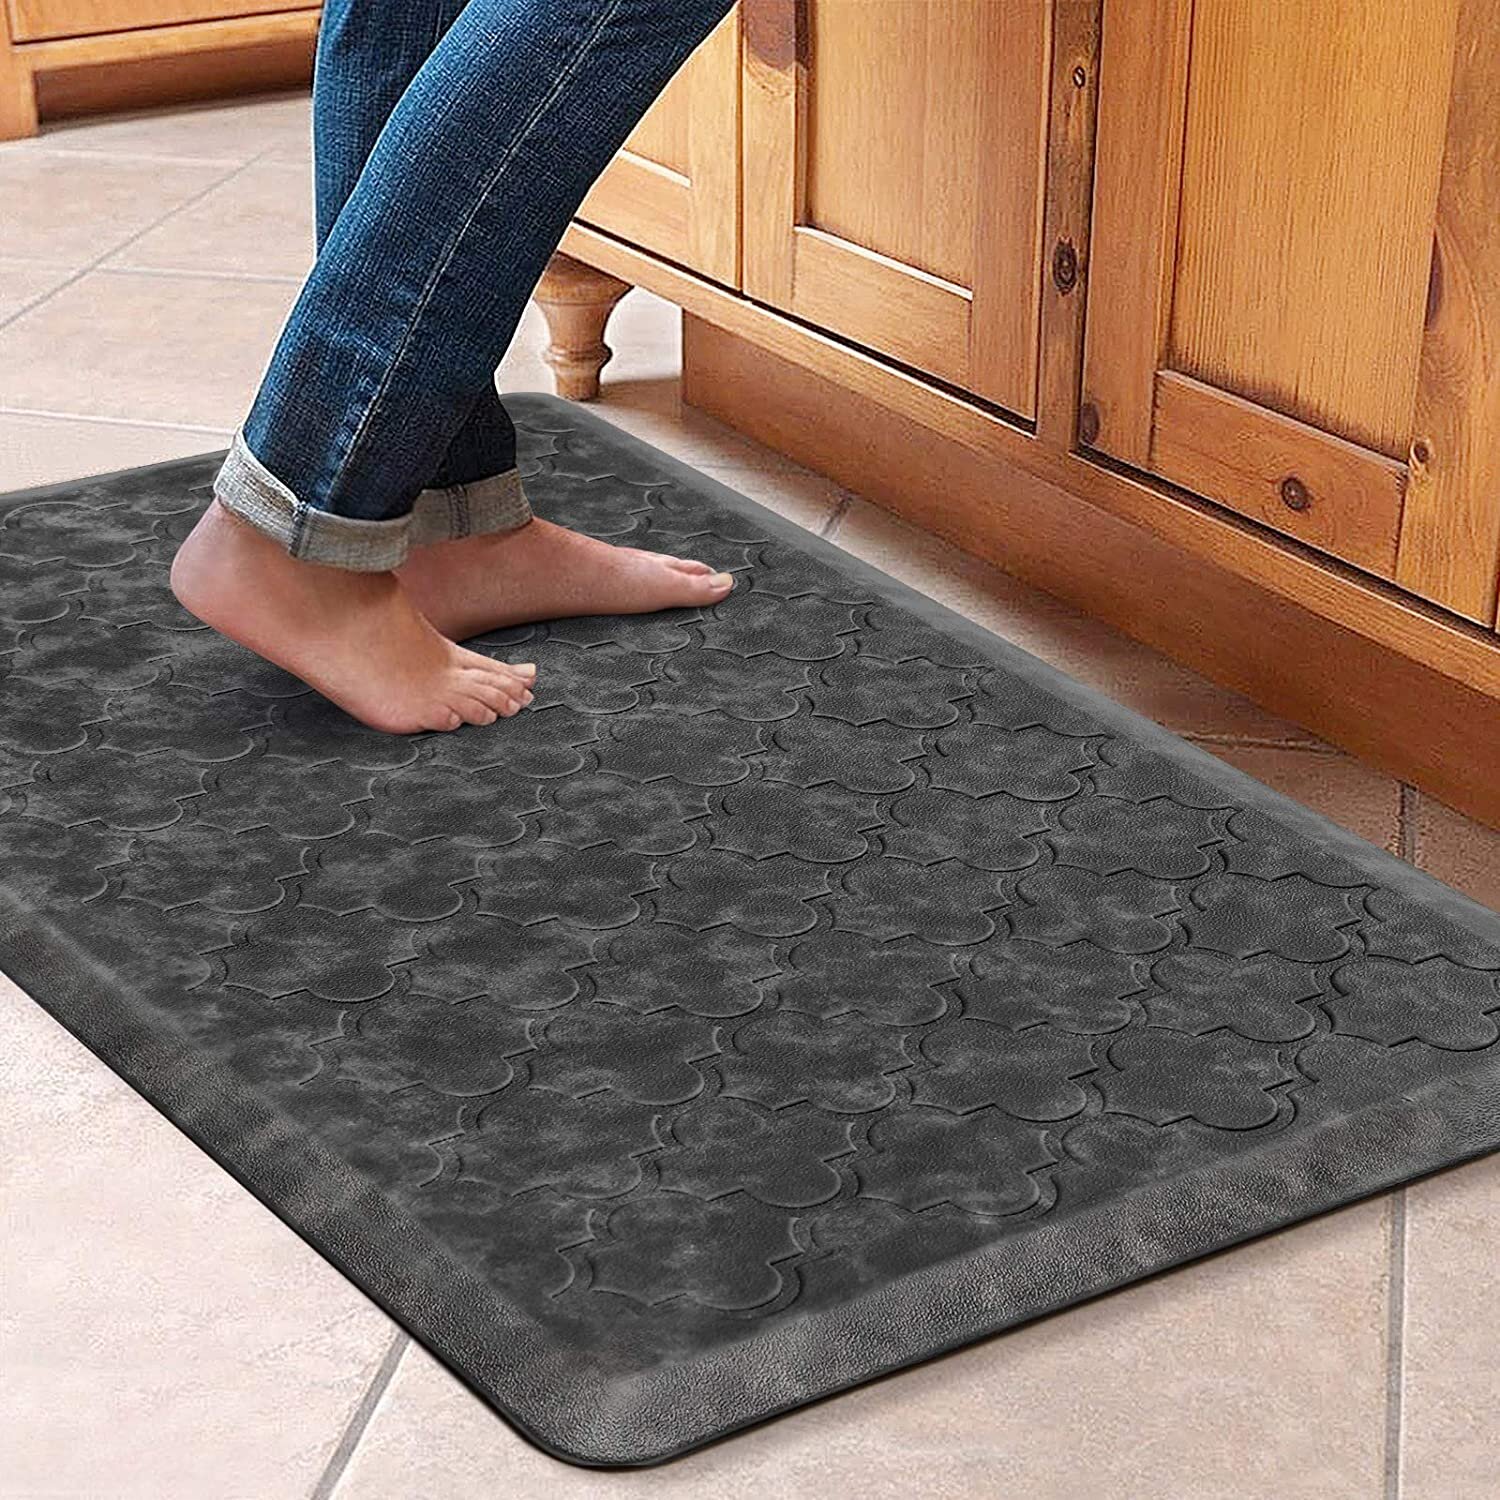  WiseLife Kitchen Mat Cushioned Anti Fatigue Floor